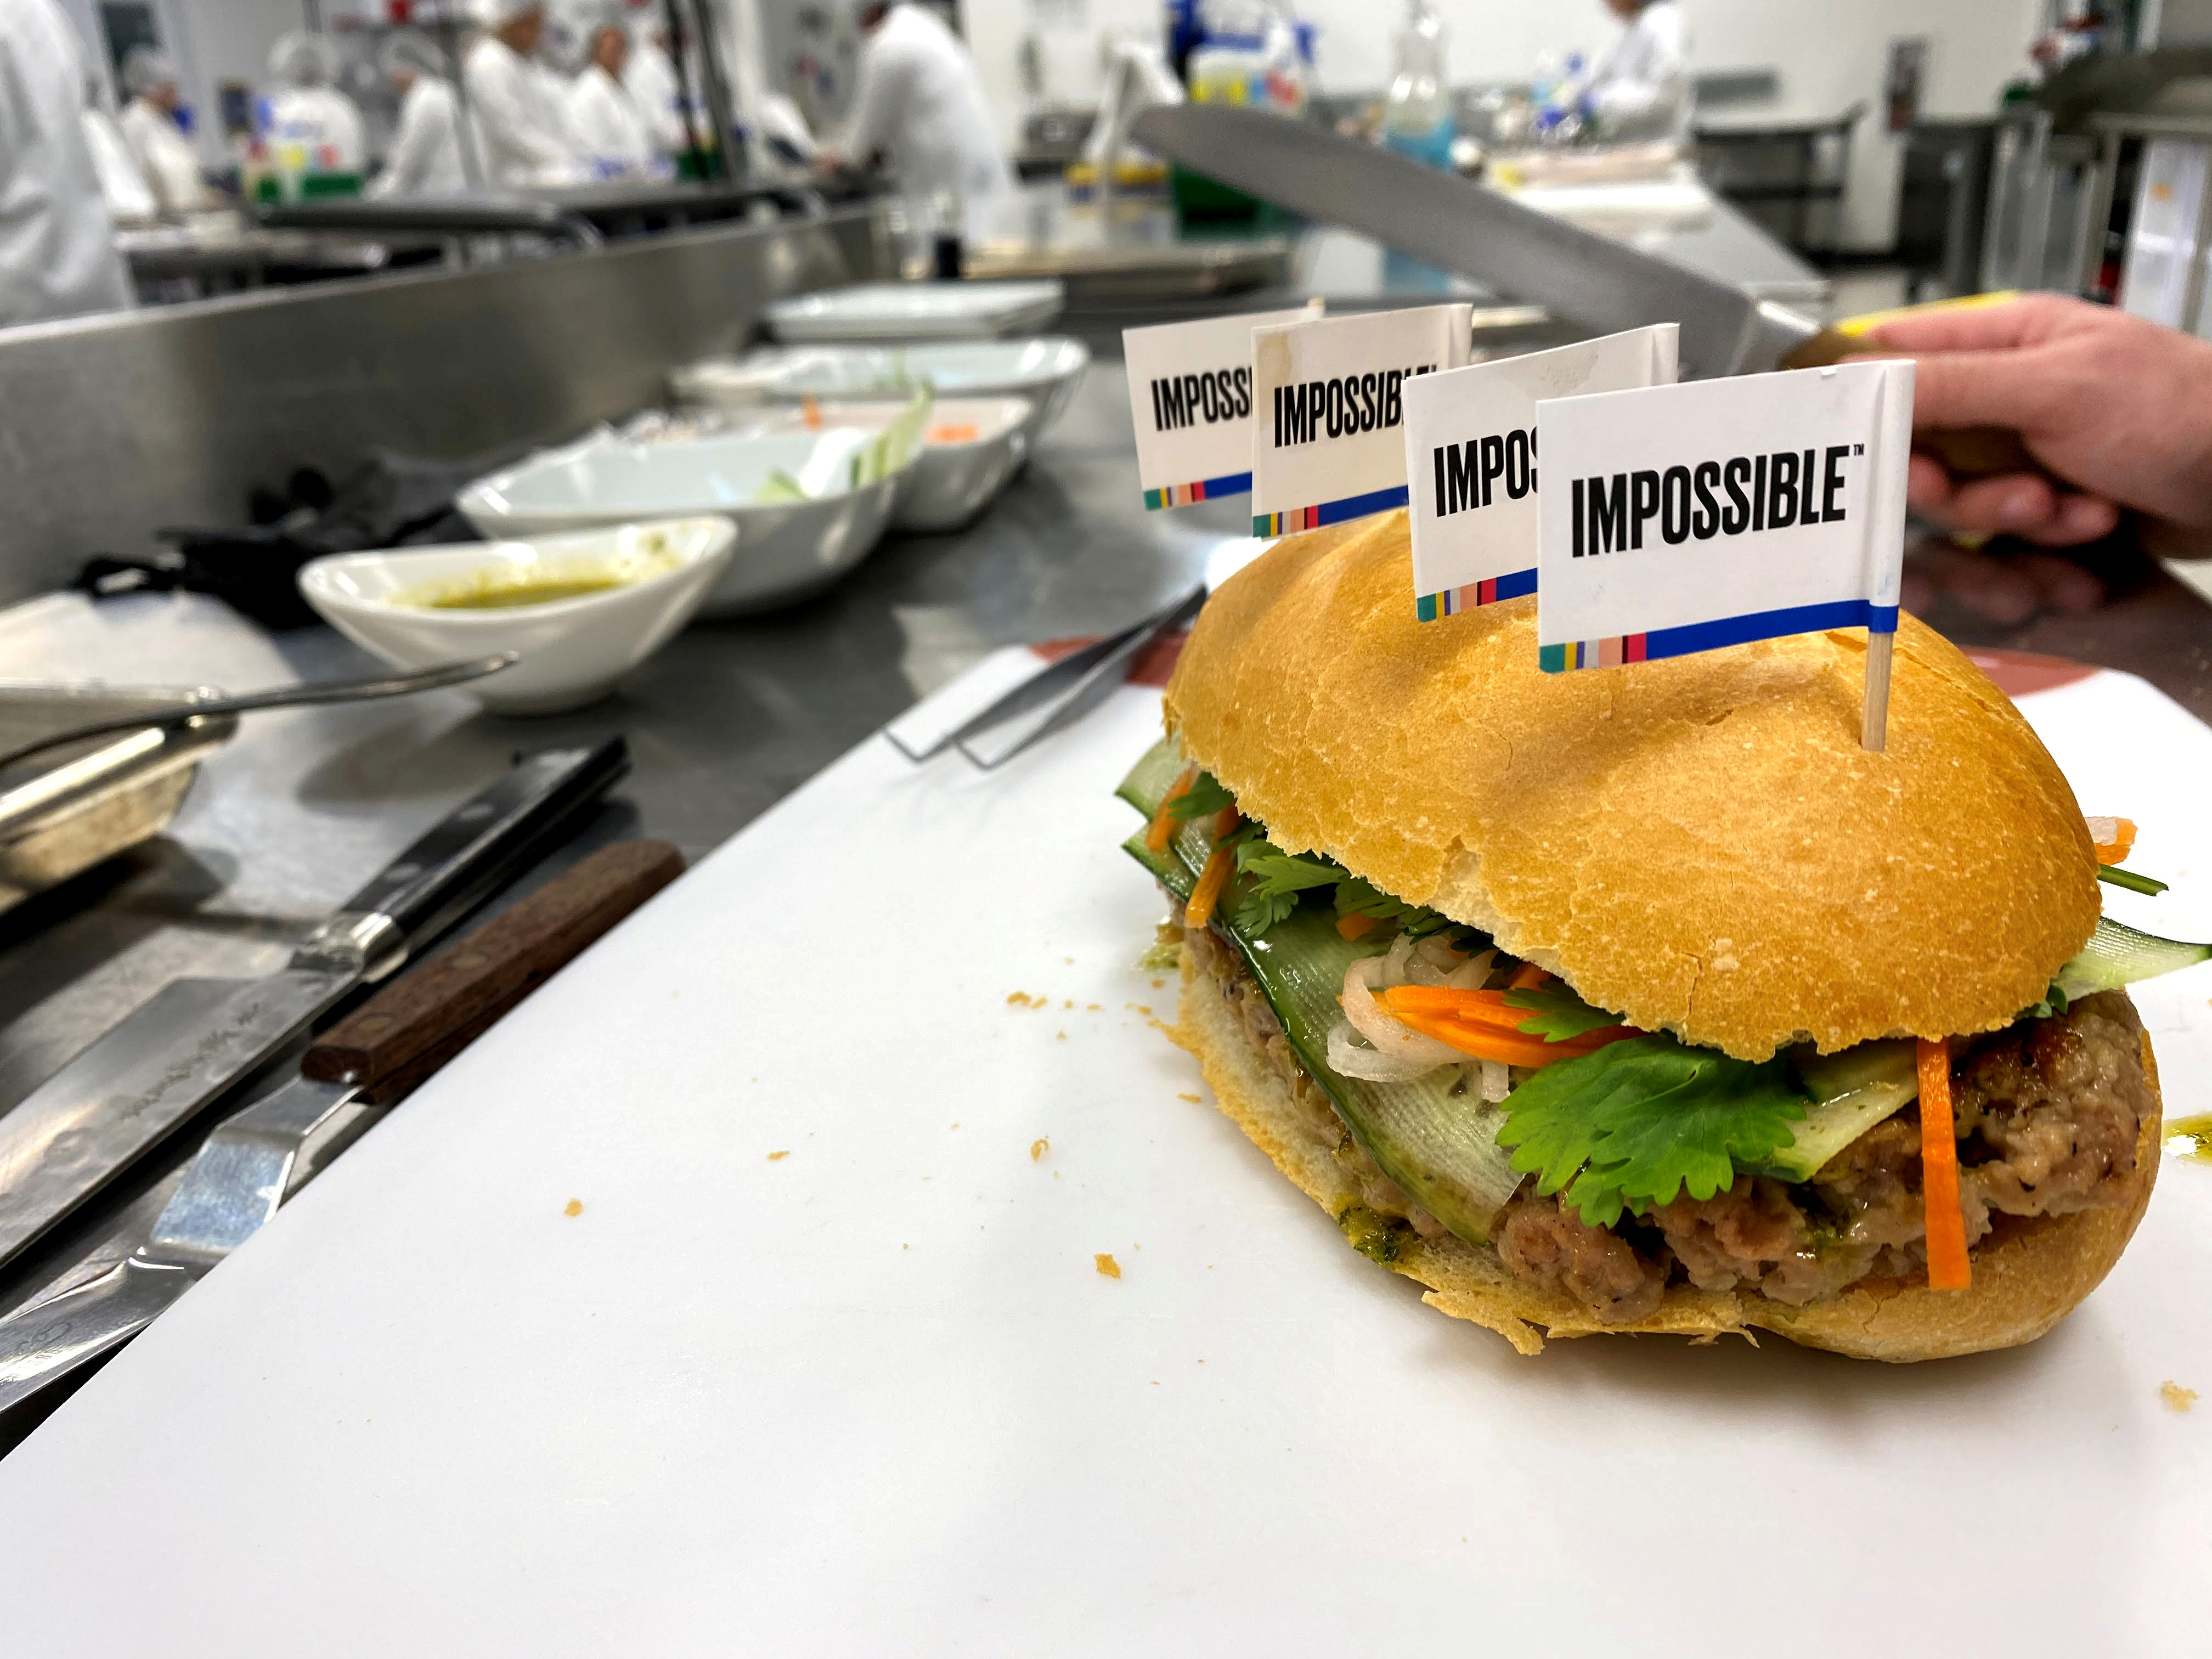 A banh mi sandwich made with a plant-based Impossible Pork patty at the Impossible Foods headquarters in Silicon Valley